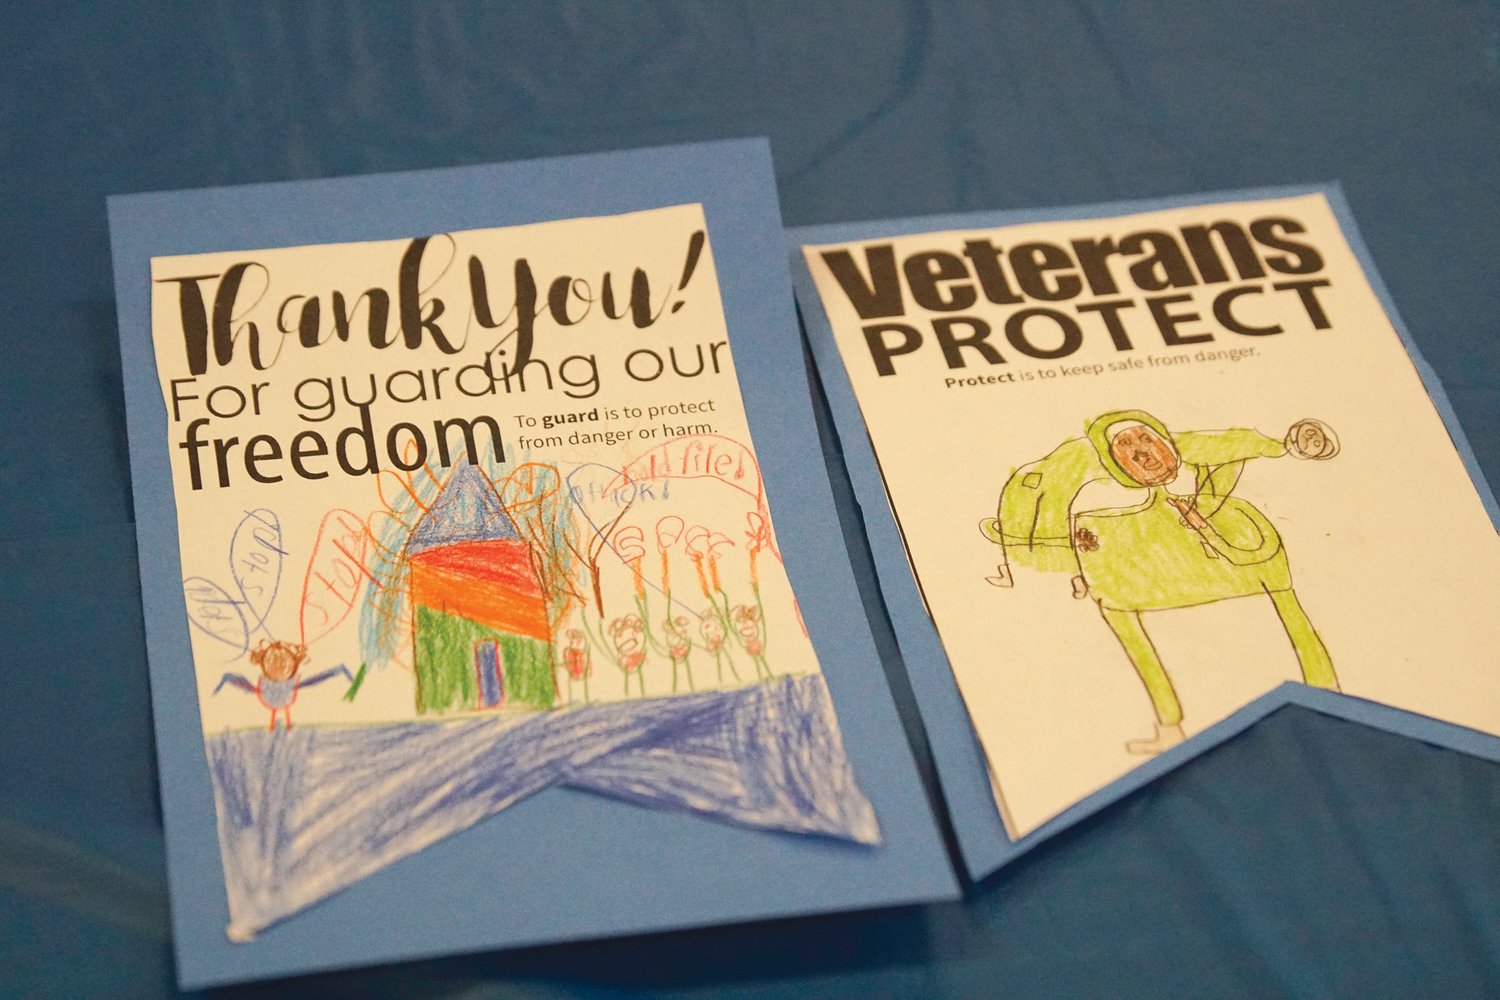 ART OF SAYING THANKS: Artwork created by students
to celebrate veterans, the school's honored guests, was
placed on tables for all to enjoy during Glen Hills Elementary
School's Veterans Day Celebration.